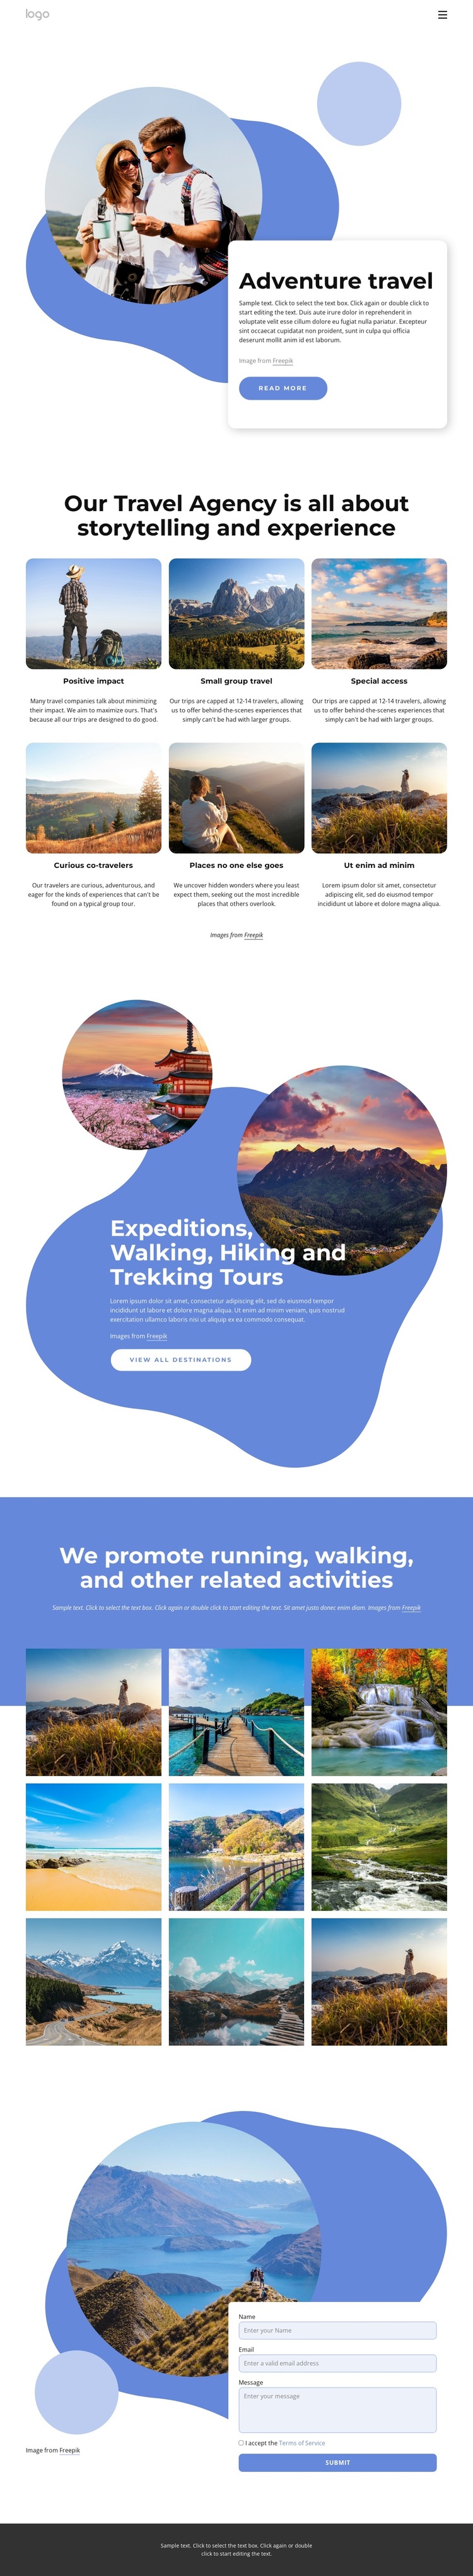 Agency specializing in luxury adventure travel Template